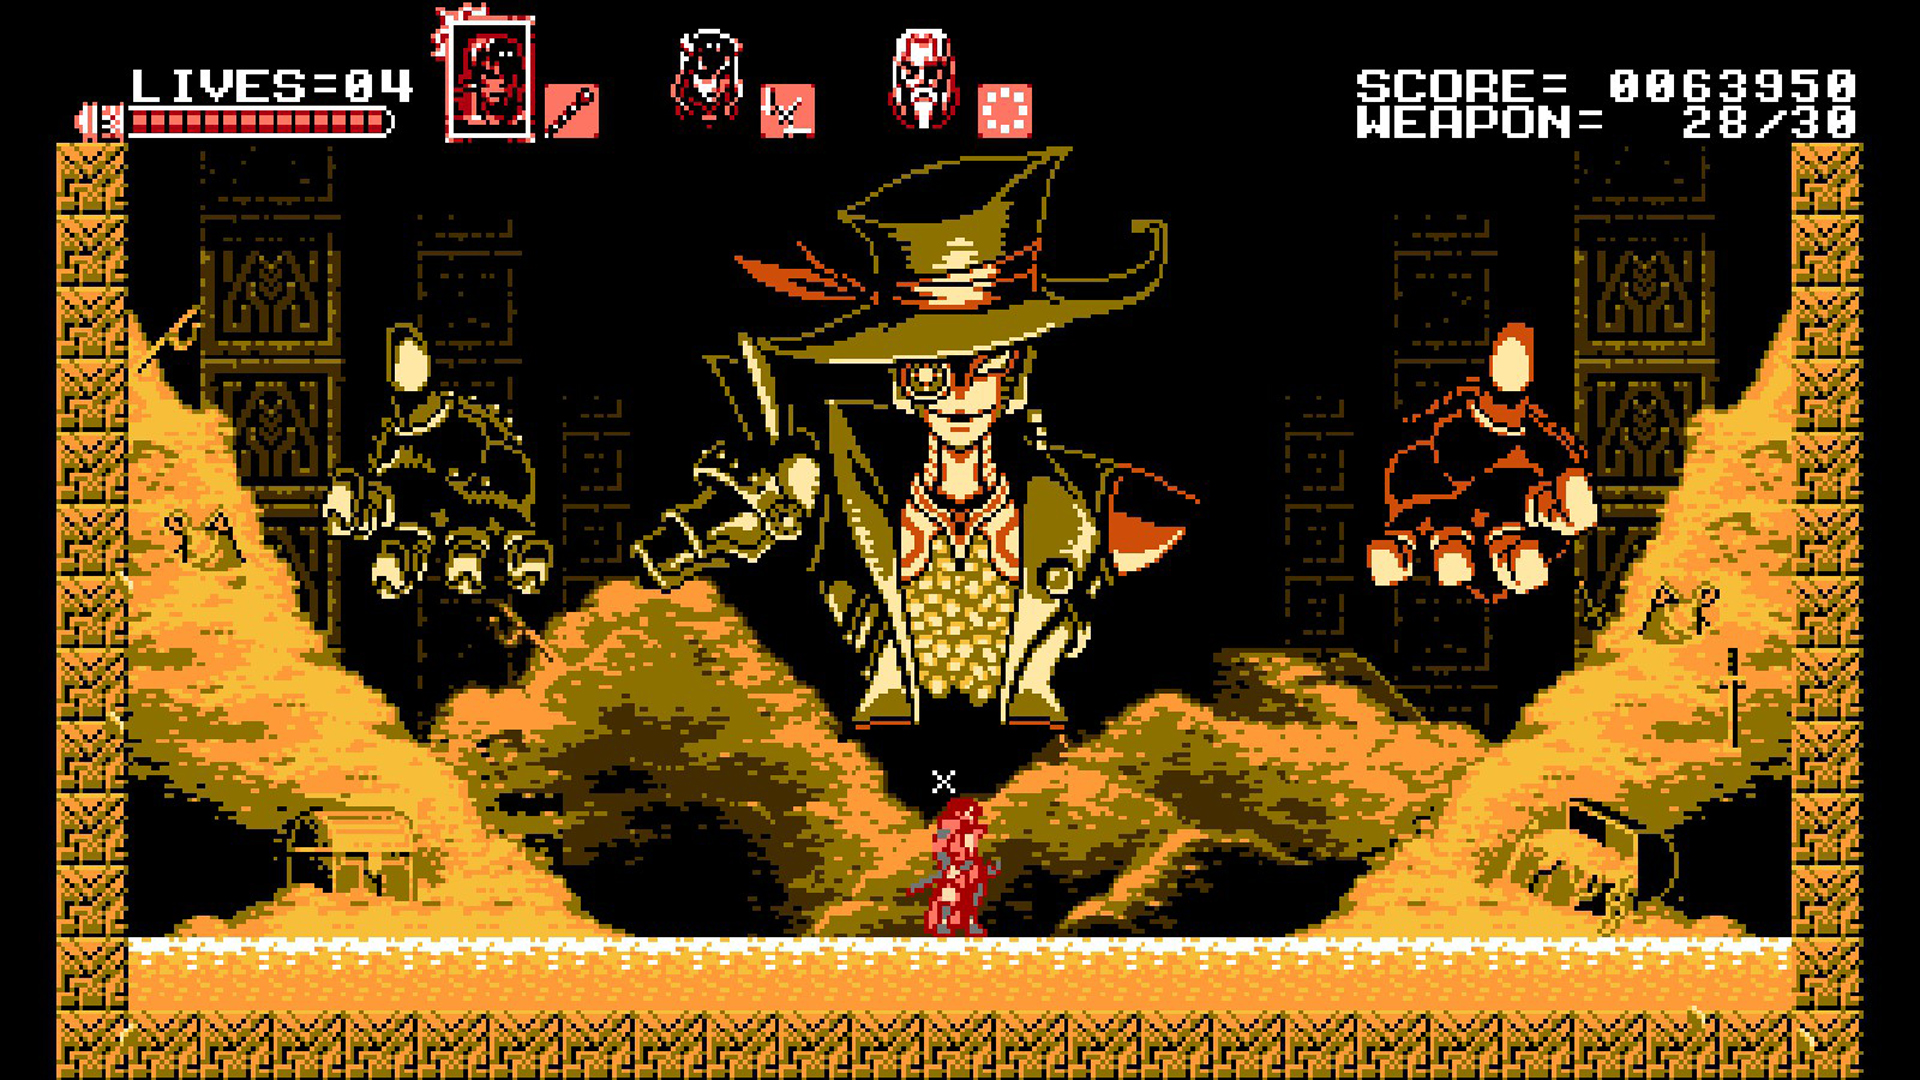 A mechanoid enemy with a top hat and a threatening smile in one of the best vampire games, Bloodstained Curse of the Moon